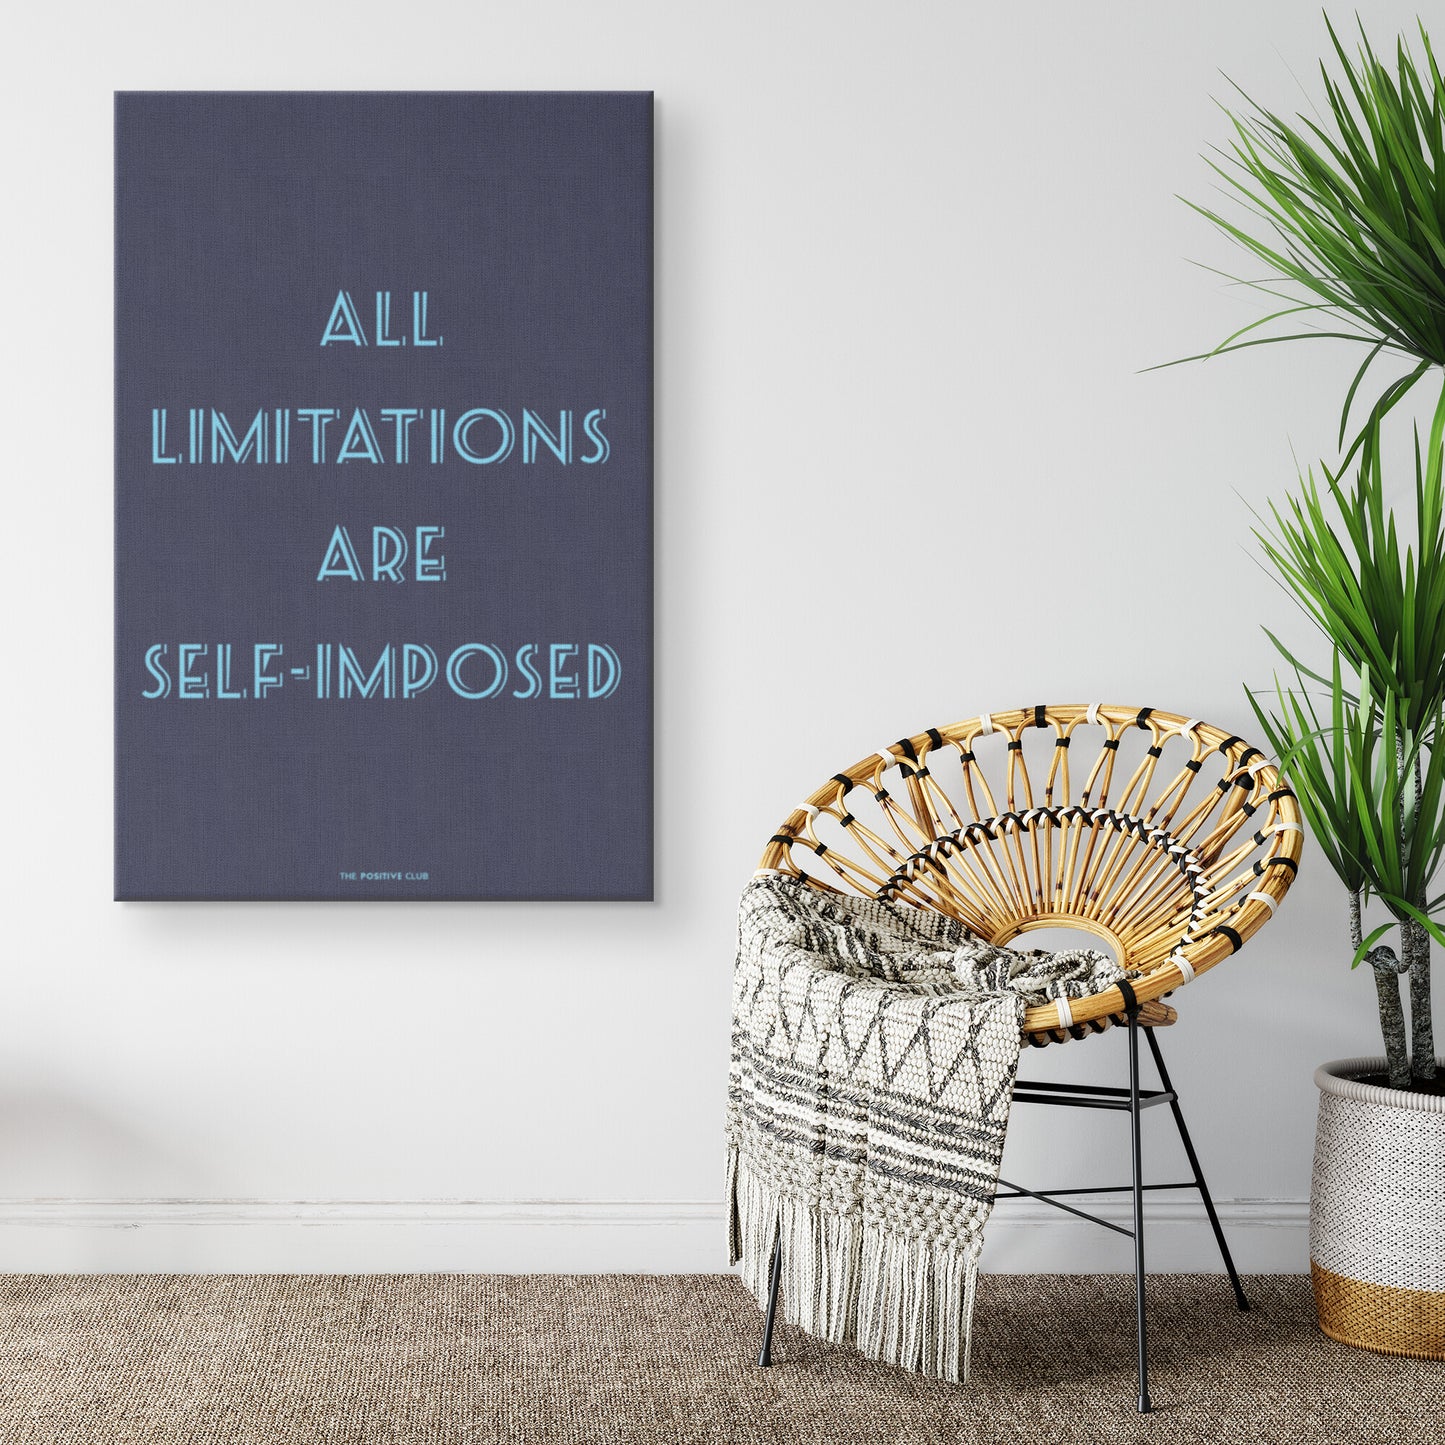 ALL LIMITATIONS ARE SELF-IMPOSED